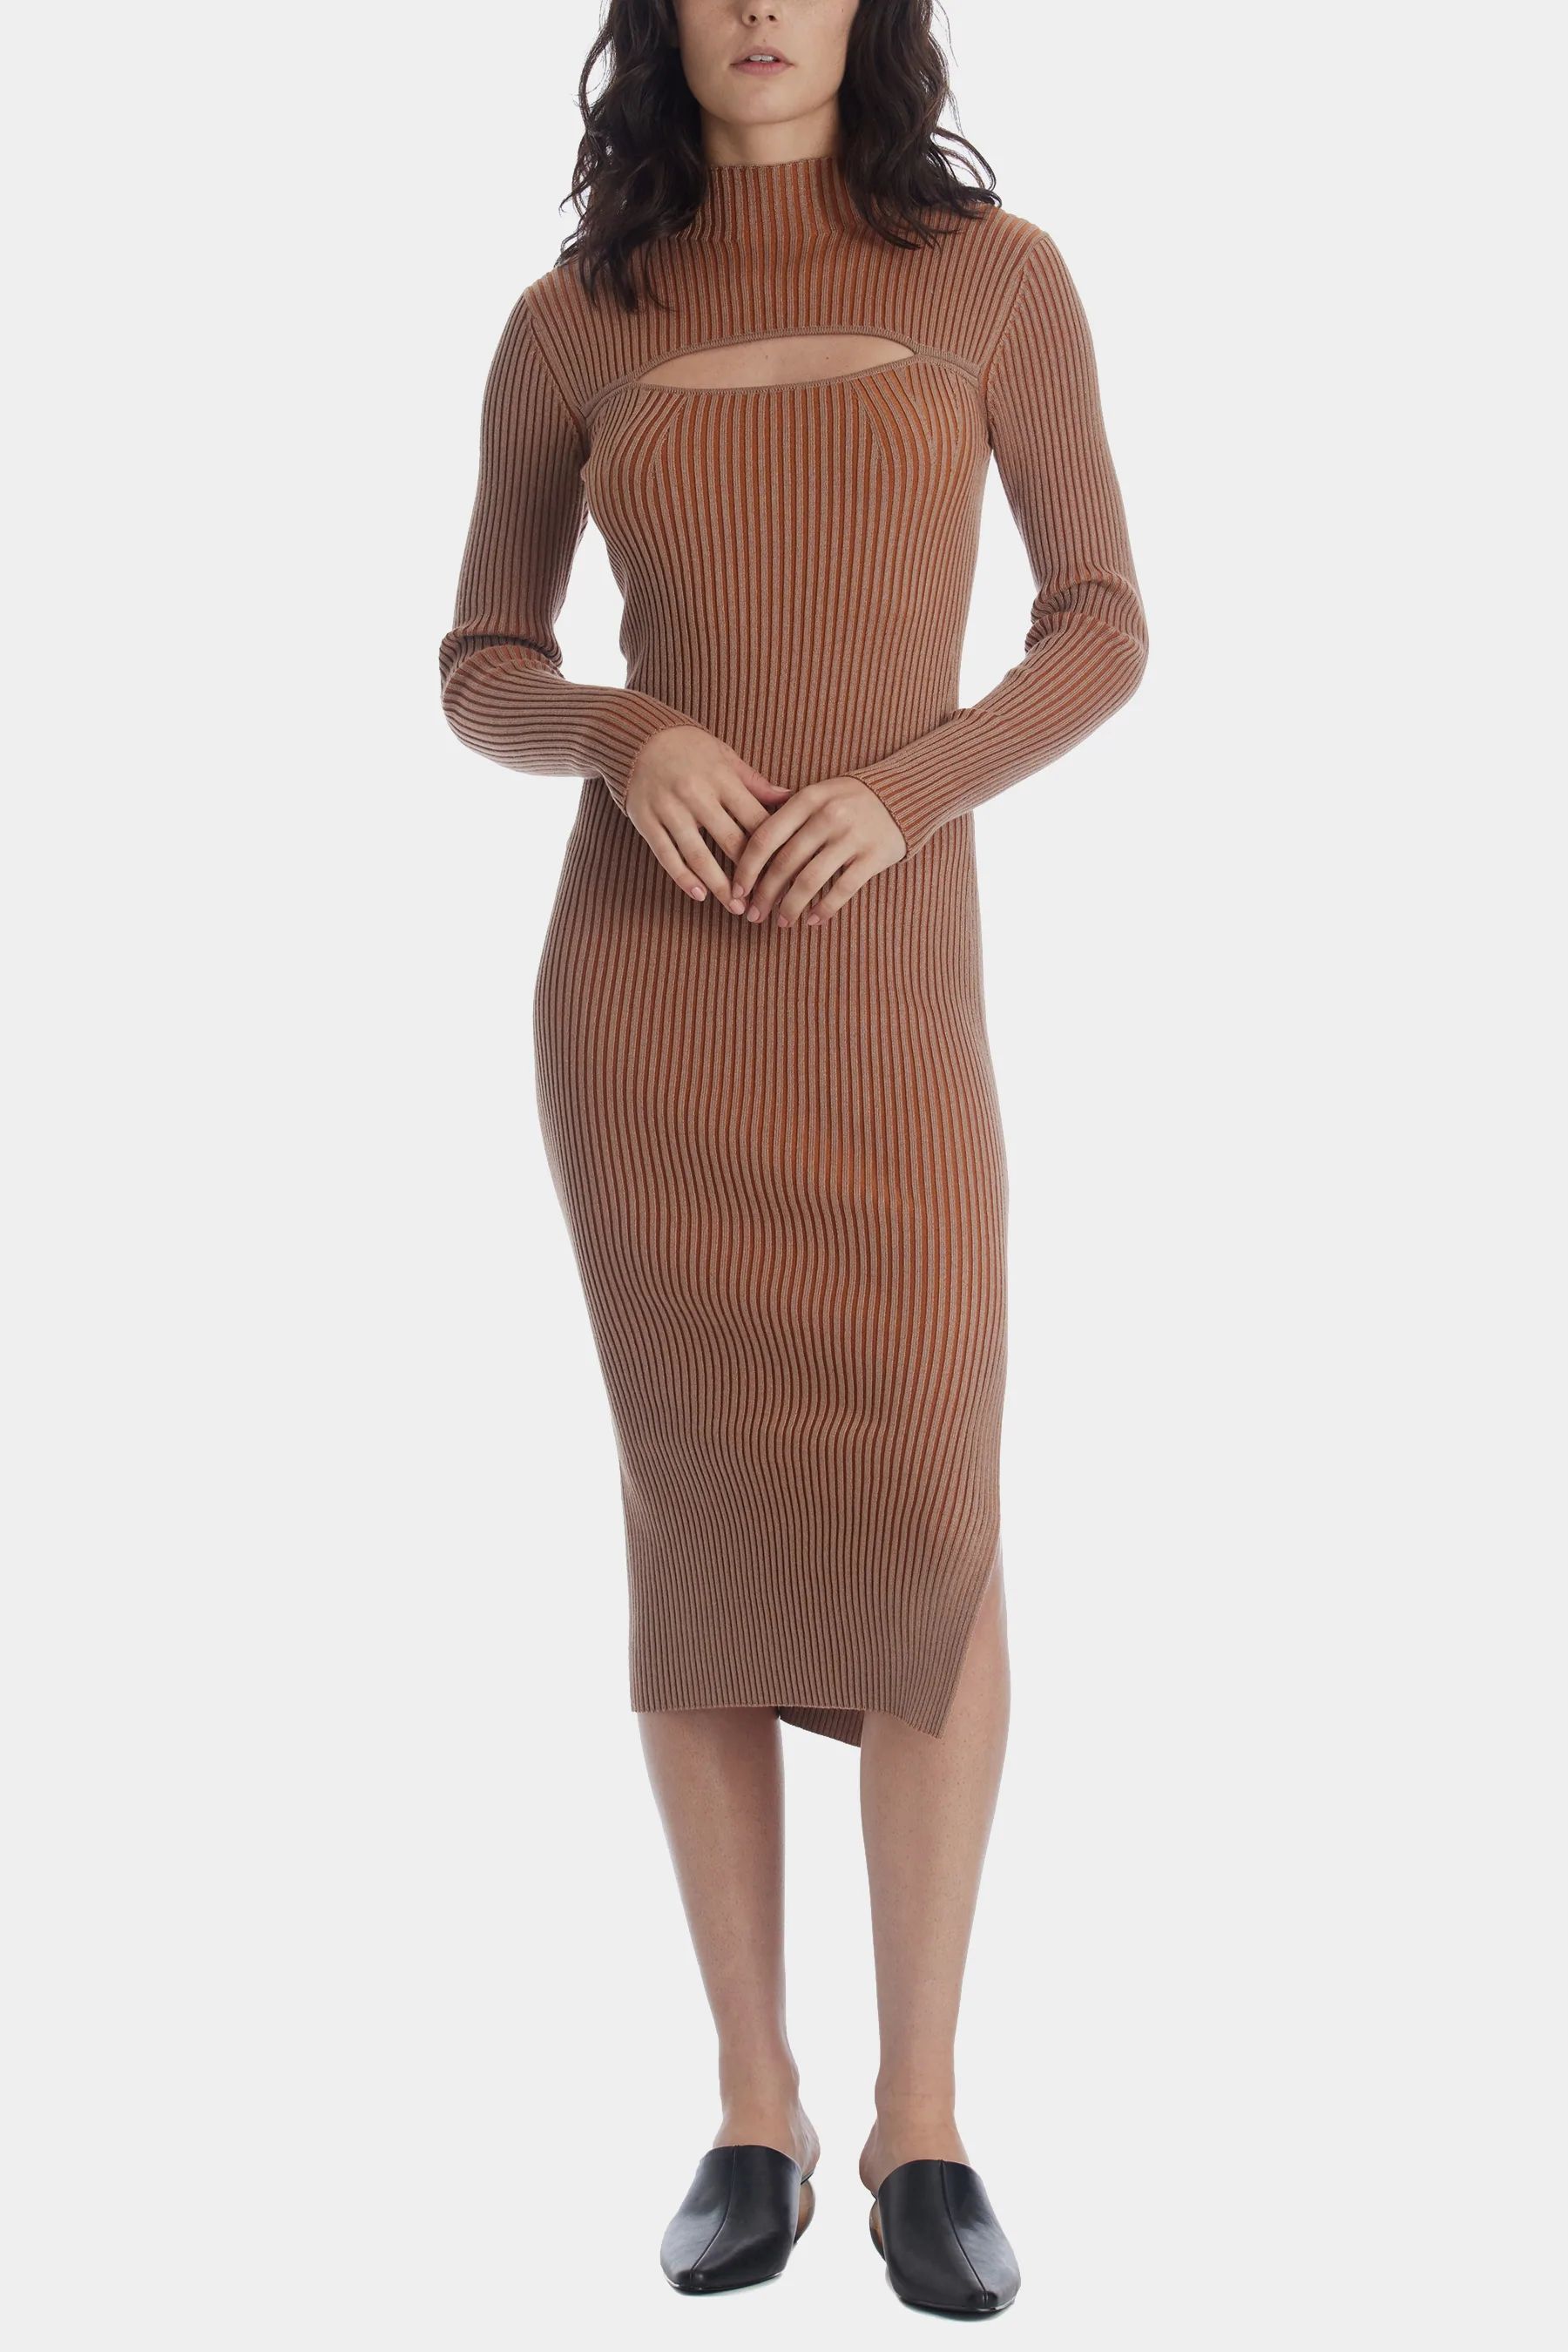 French Connection Women's Mathilda Knit Cut Out Dress in Camel/Glazed Ginger Large Lord & Taylor | Lord & Taylor